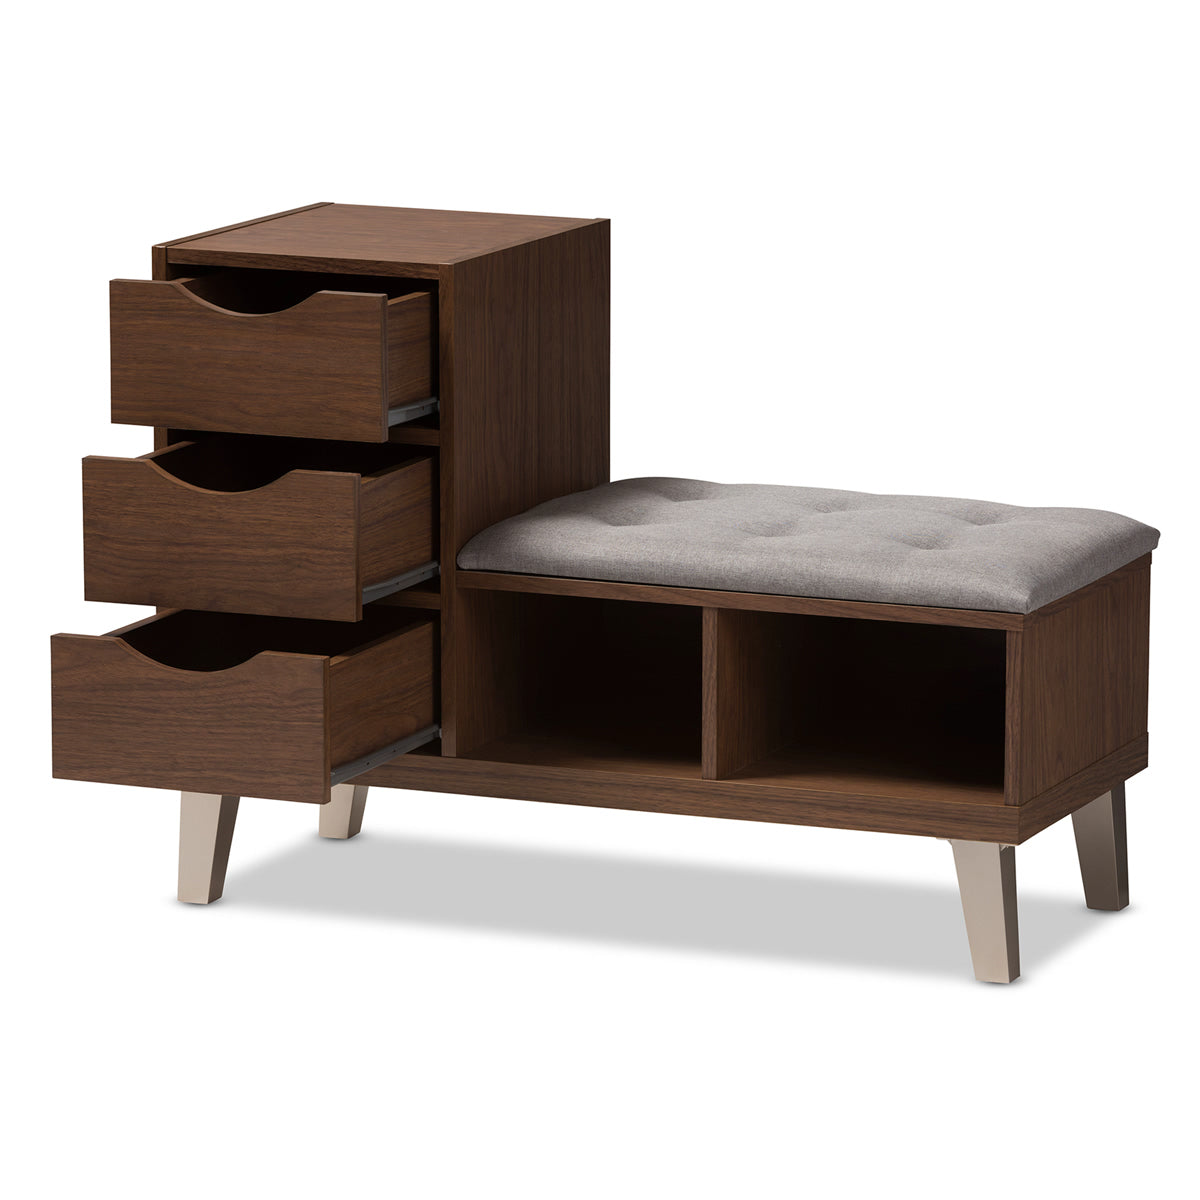 Baxton Studio Arielle Modern and Contemporary Walnut Wood 3-Drawer Shoe Storage Grey Fabric Upholstered Seating Bench with Two Open Shelves Baxton Studio-0-Minimal And Modern - 2